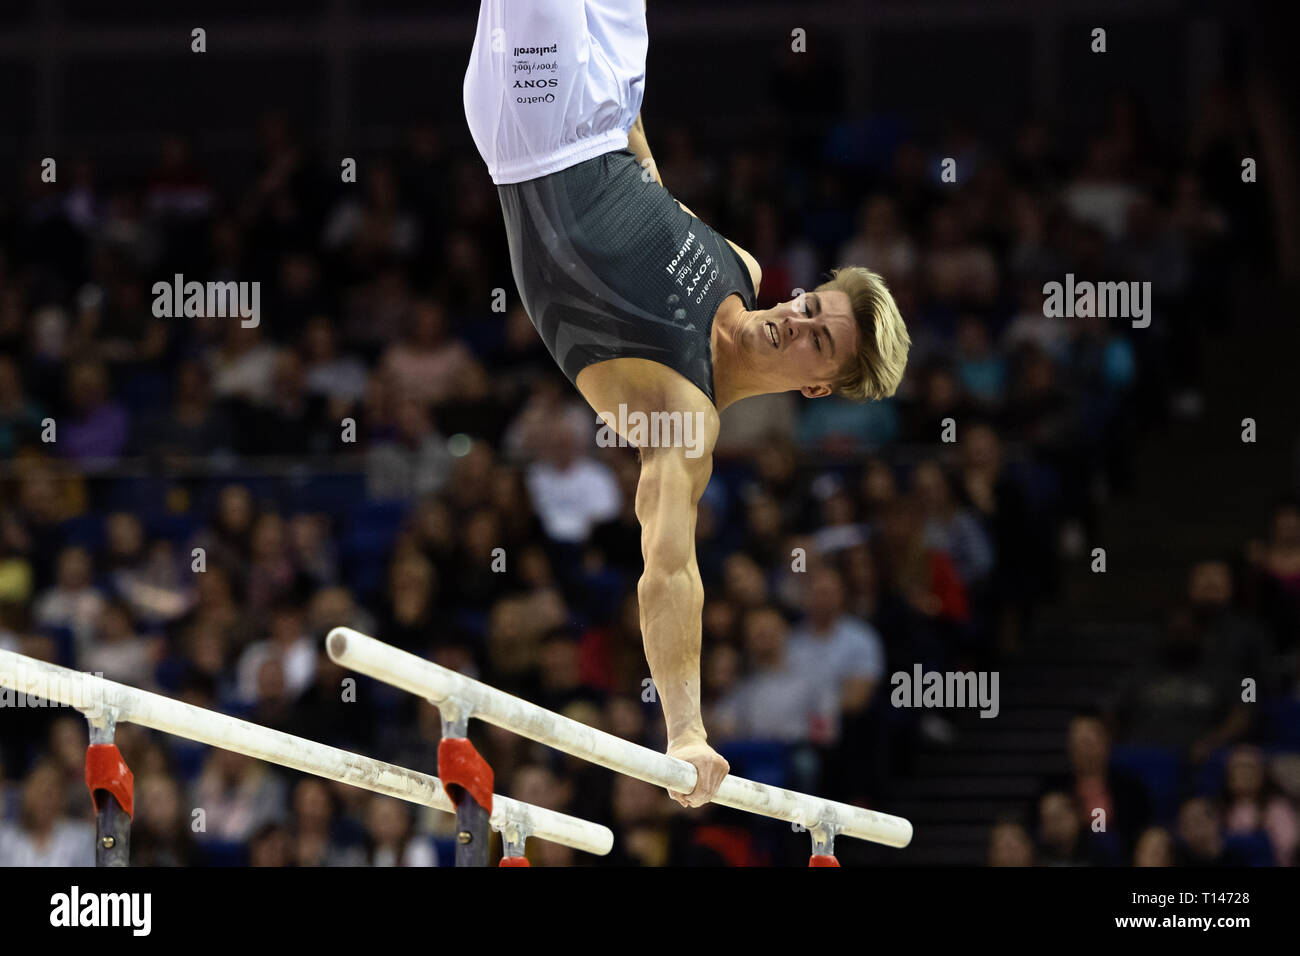 London, UK. 23rd March, 2019. Jay Thompson performs on the Parallel Bars during the Matchroom Multisport presents the 2019 Superstars of Gymnastics at The O2 Arena on Saturday, 23 March 2019. LONDON ENGLAND. Credit: Taka G Wu/Alamy News Stock Photo